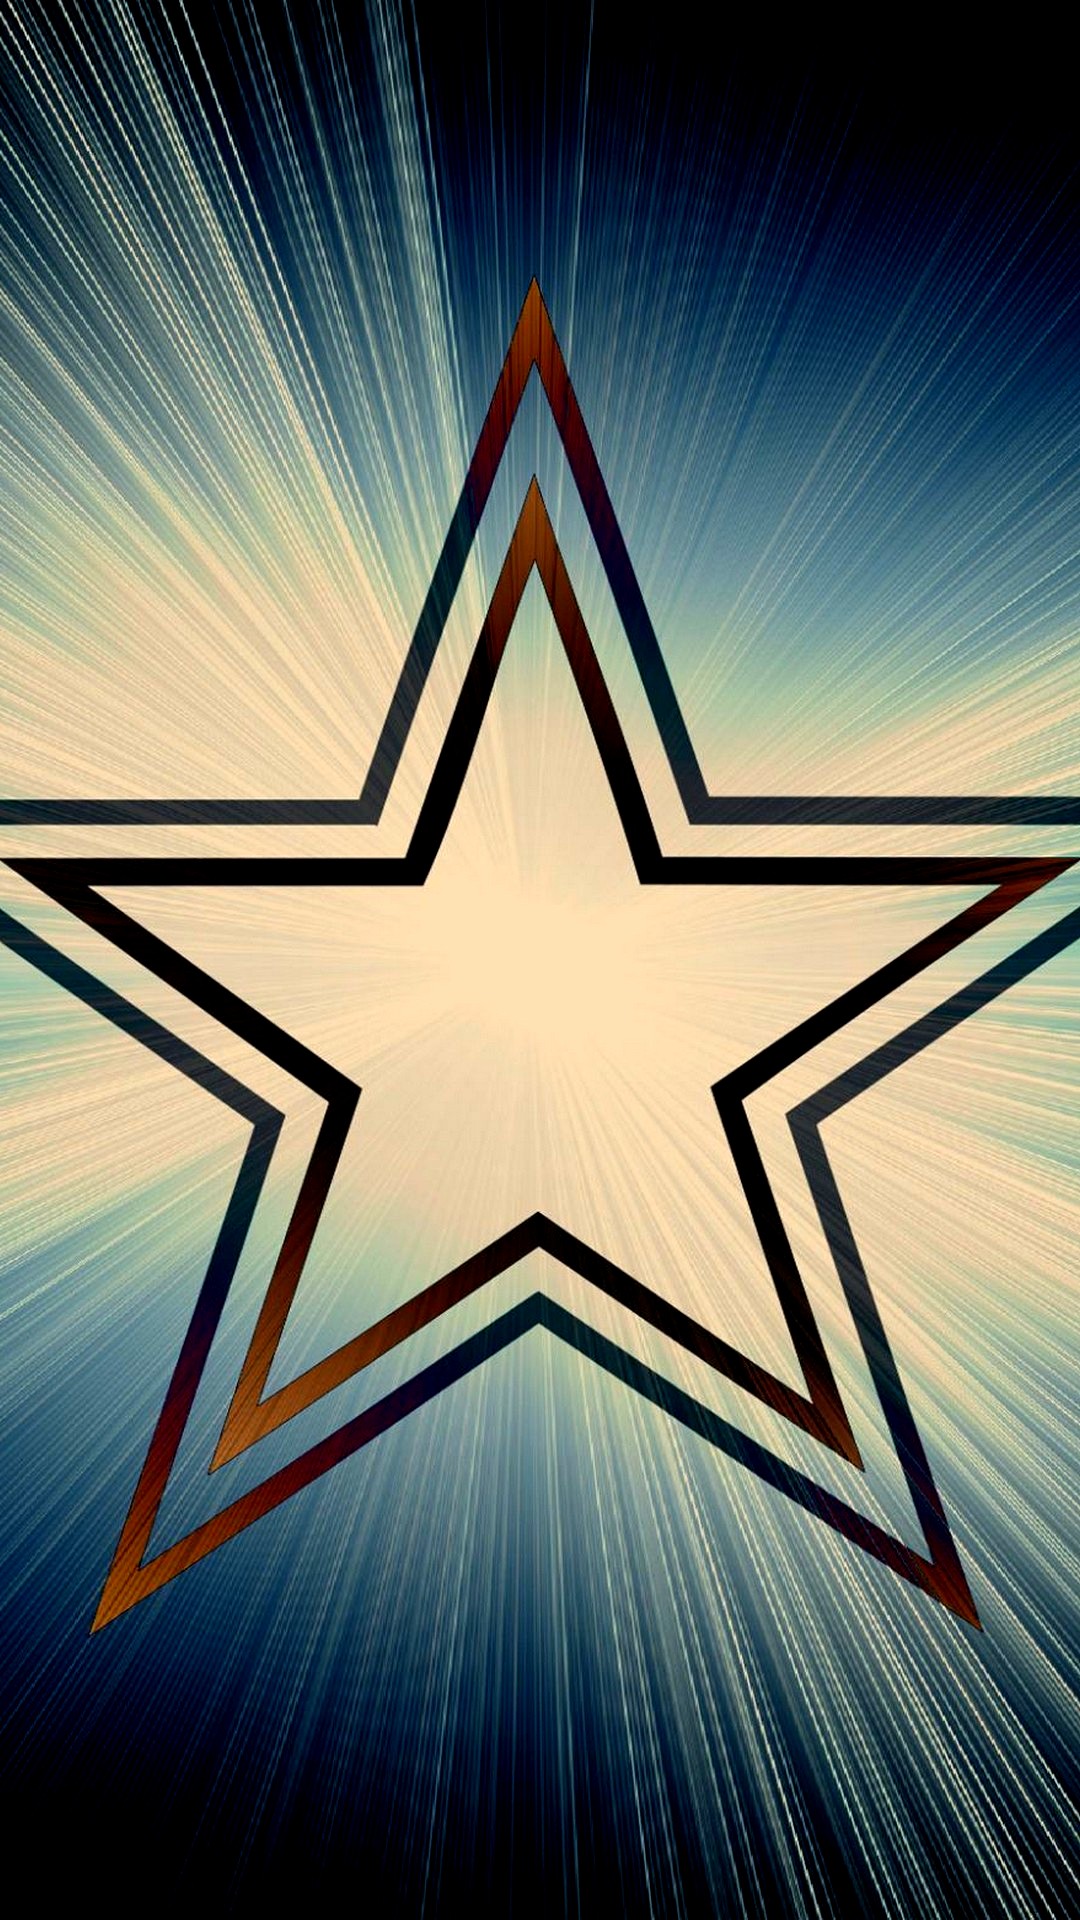 Wallpaper Android Dallas Cowboys With high-resolution 1080X1920 pixel. You can use this wallpaper for your Android backgrounds, Tablet, Samsung Screensavers, Mobile Phone Lock Screen and another Smartphones device